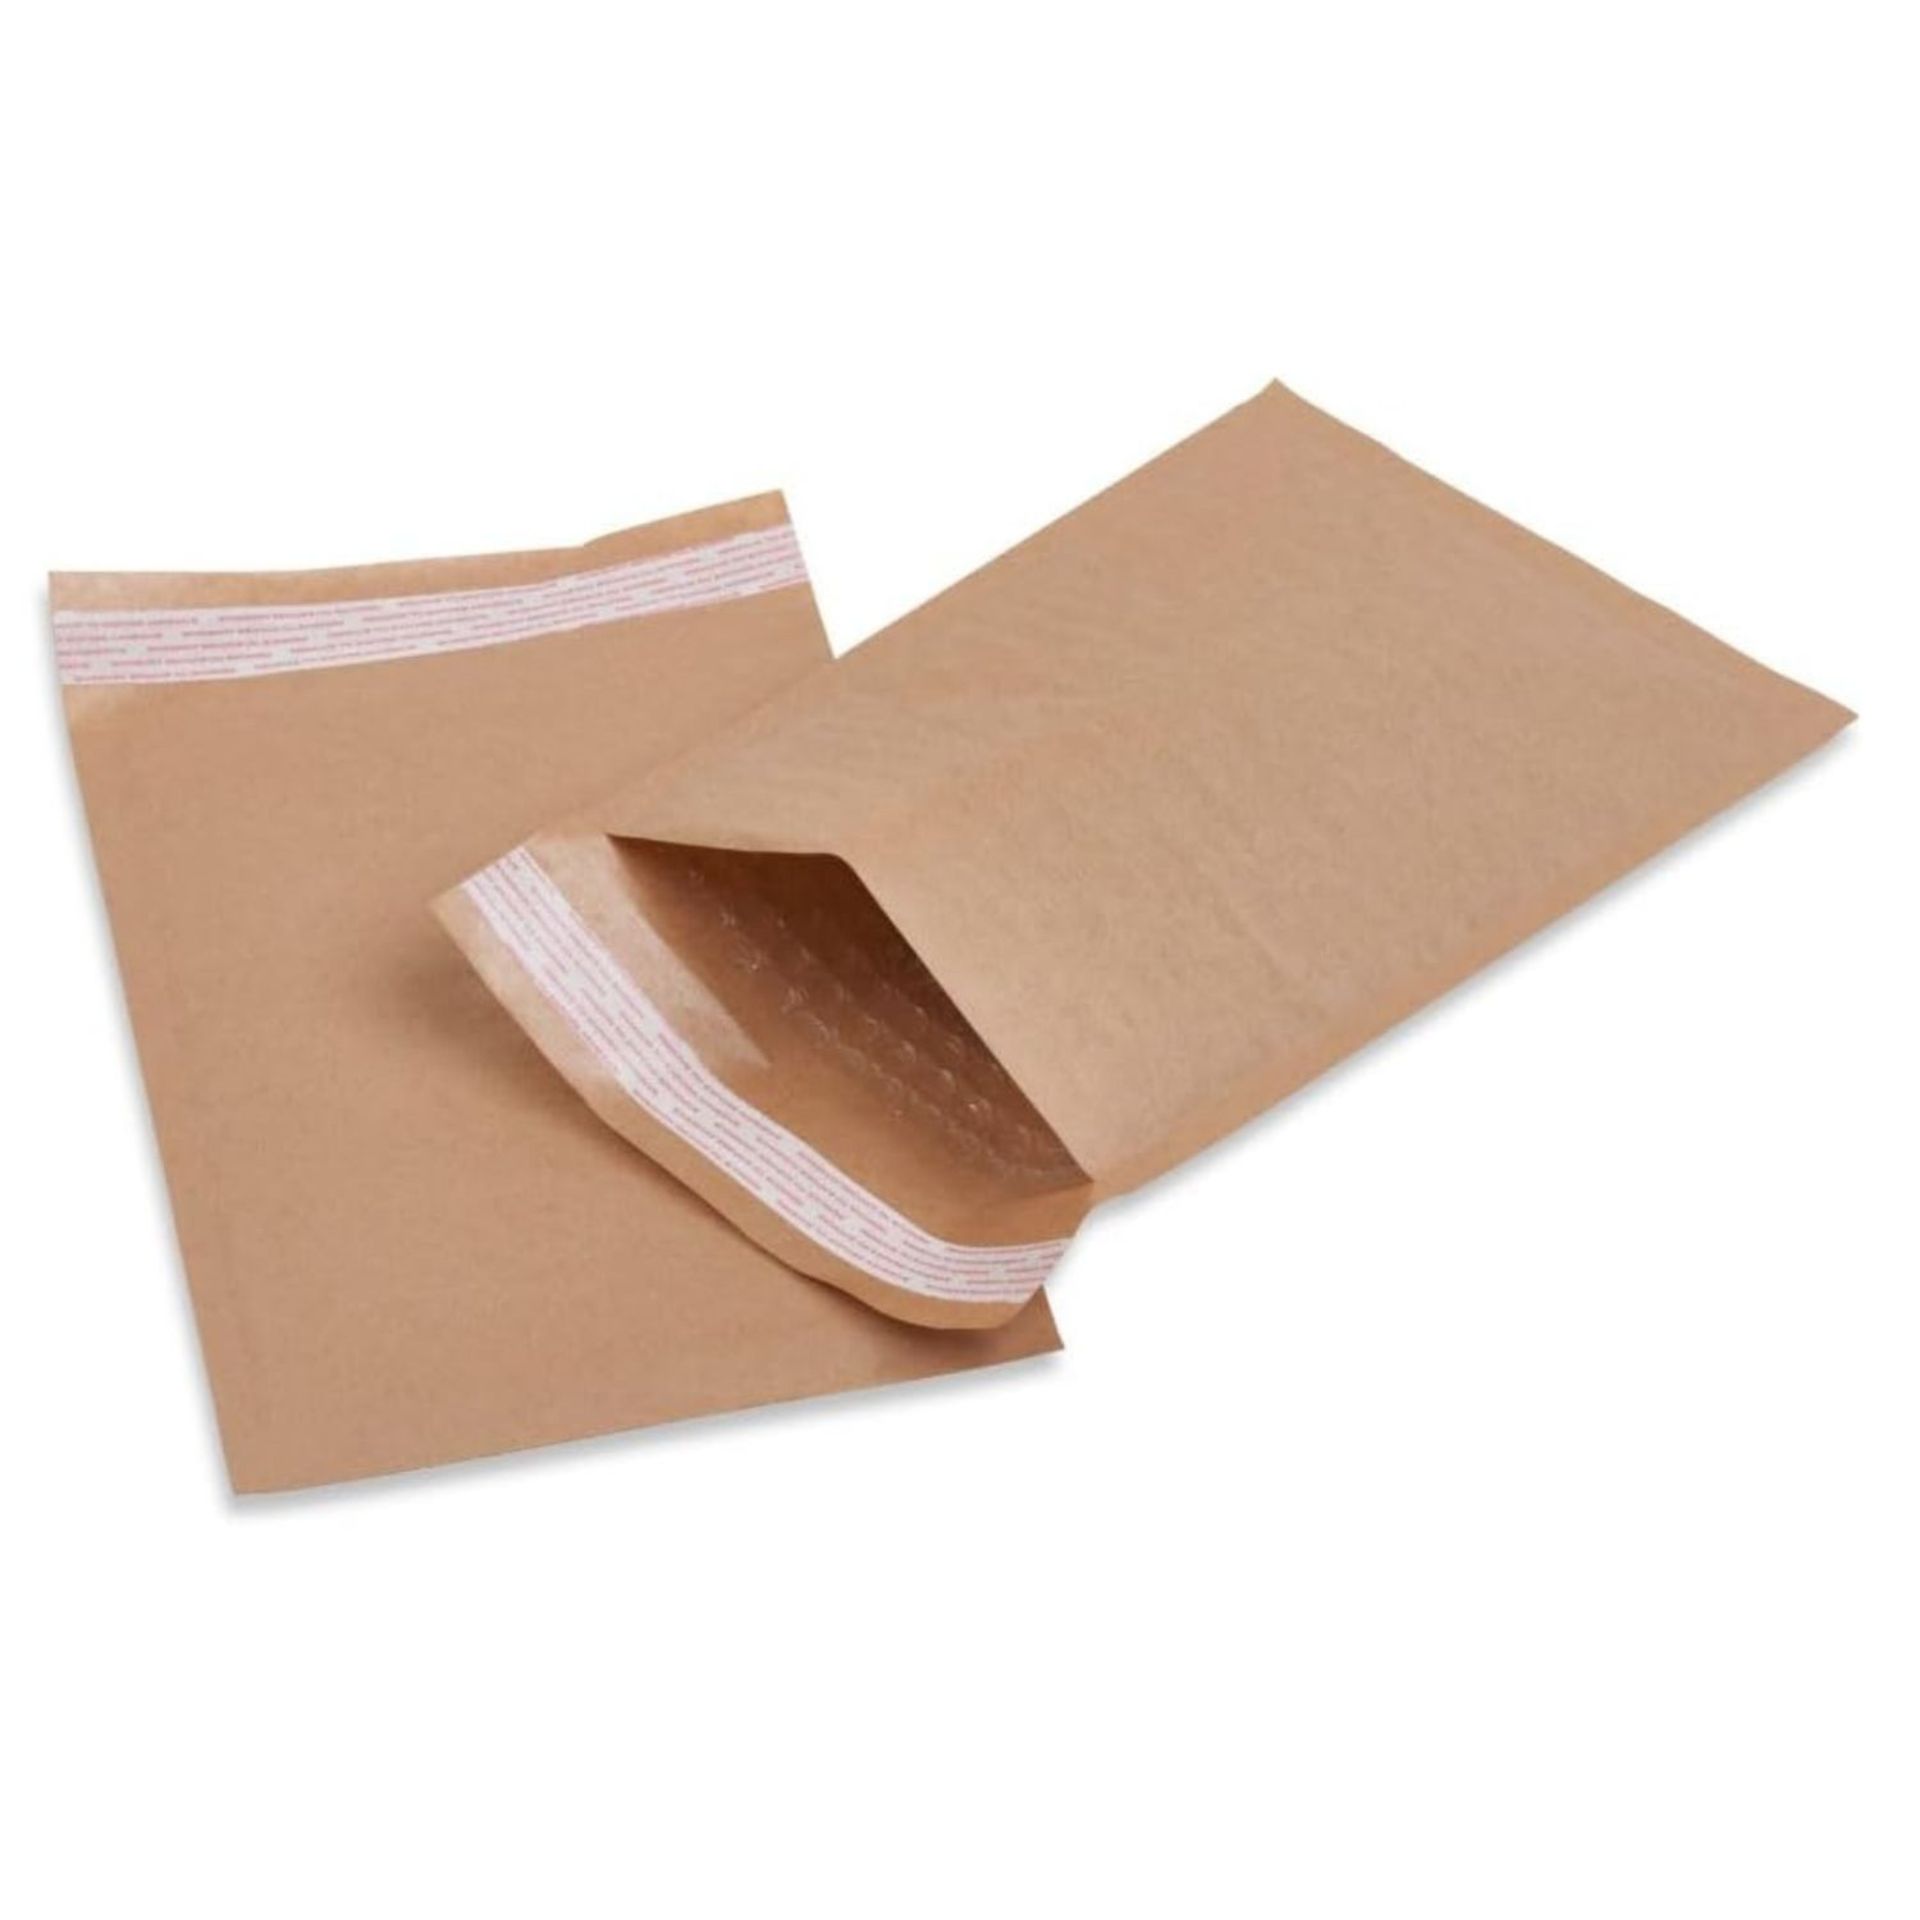 1000 BUBBLE ENVELOPES WITH PEEL AND SEAL TOUGH LIGHT PADDED (170 X 210MM) - Image 3 of 4